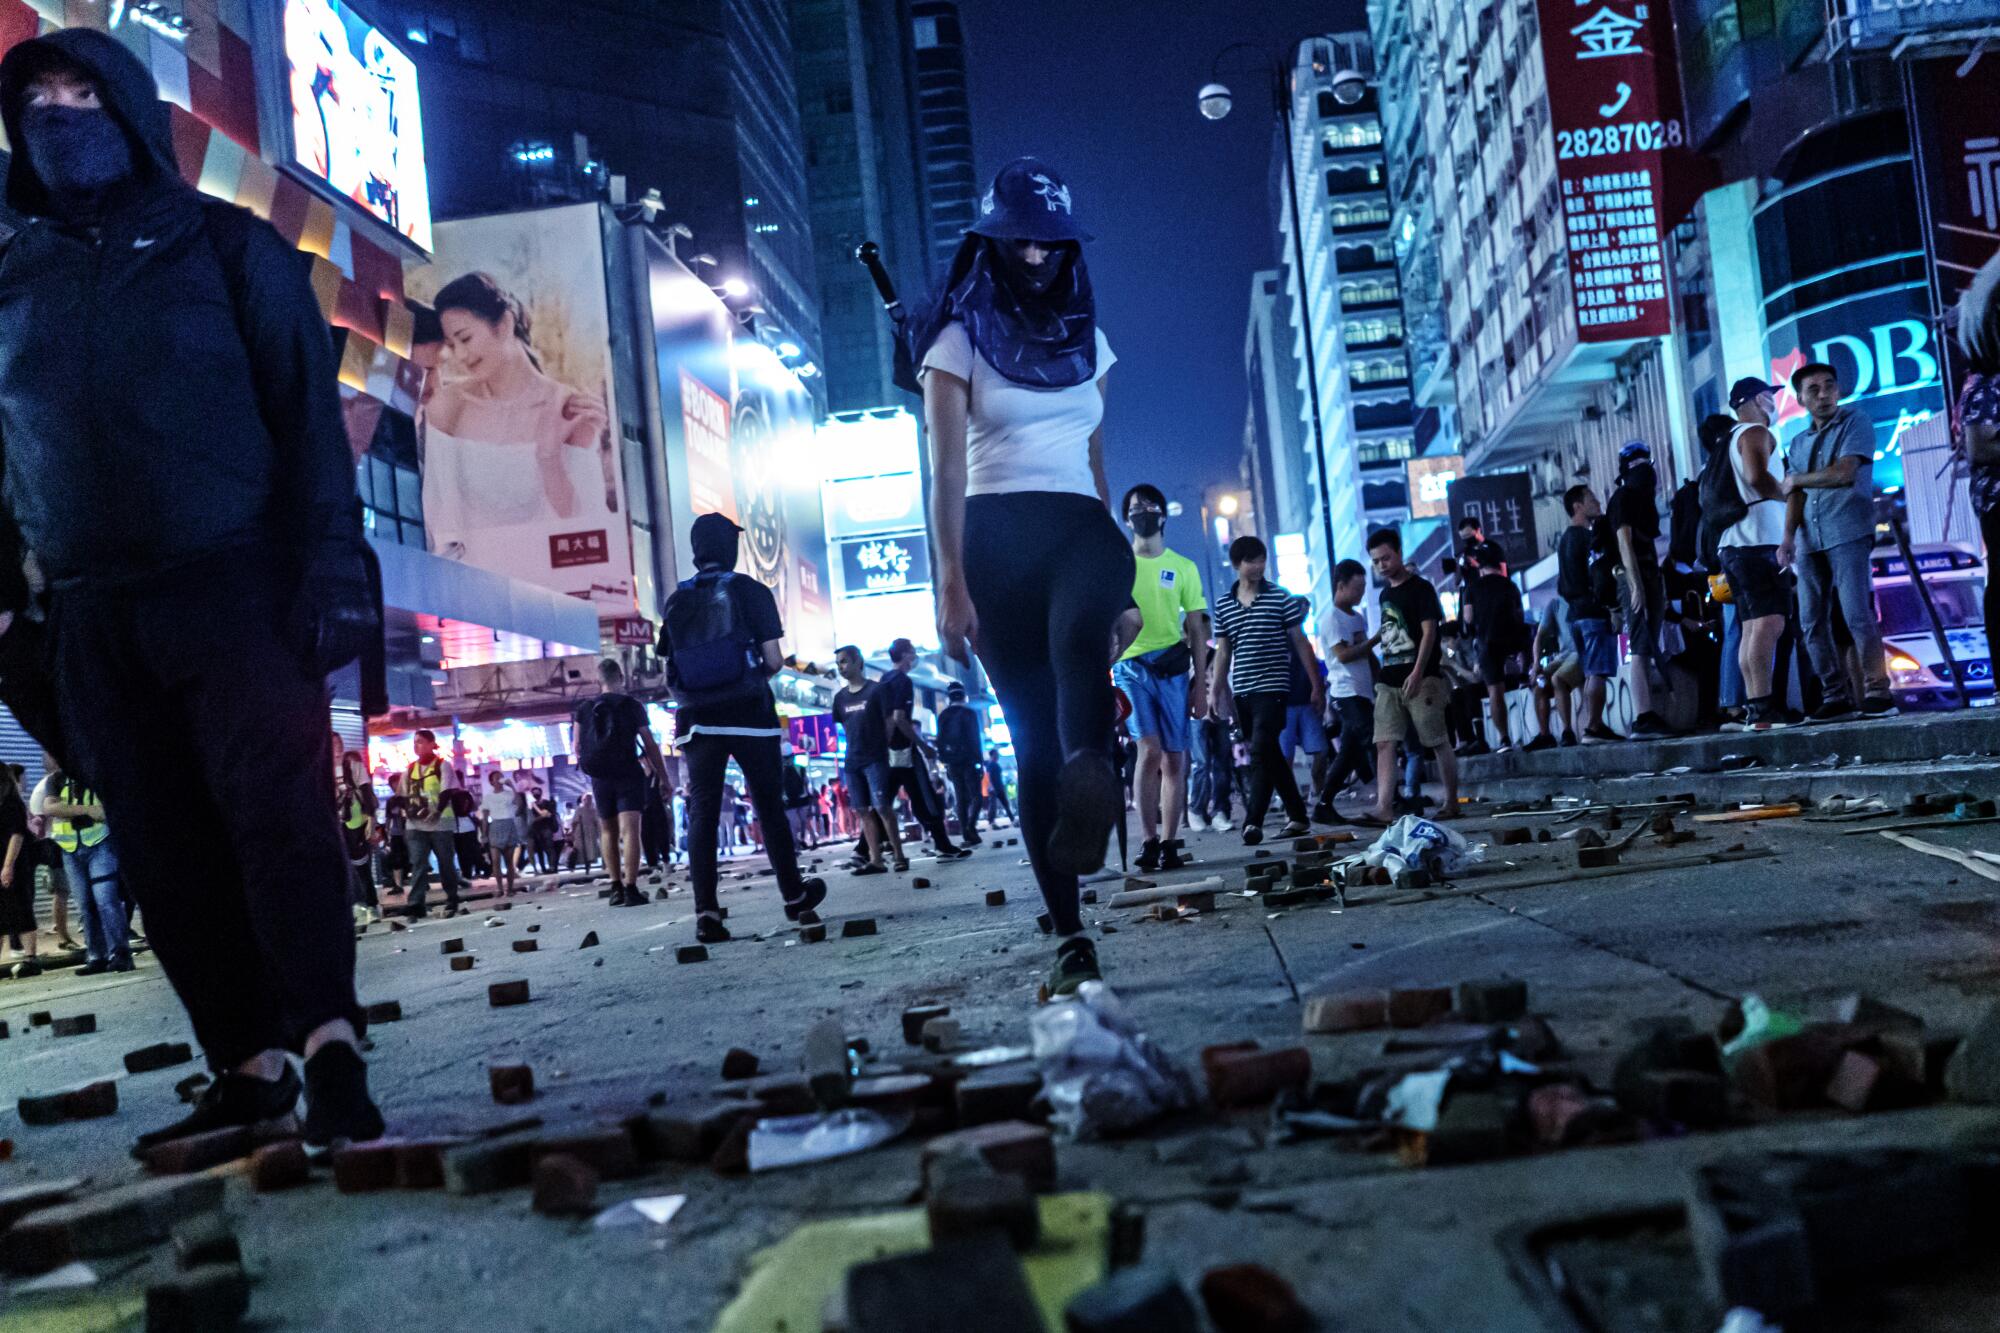 Protester spread out bricks pulled from the sidewalk as obstacles on the road on Nathan Road in the Mong Kok district of Hong Kong.